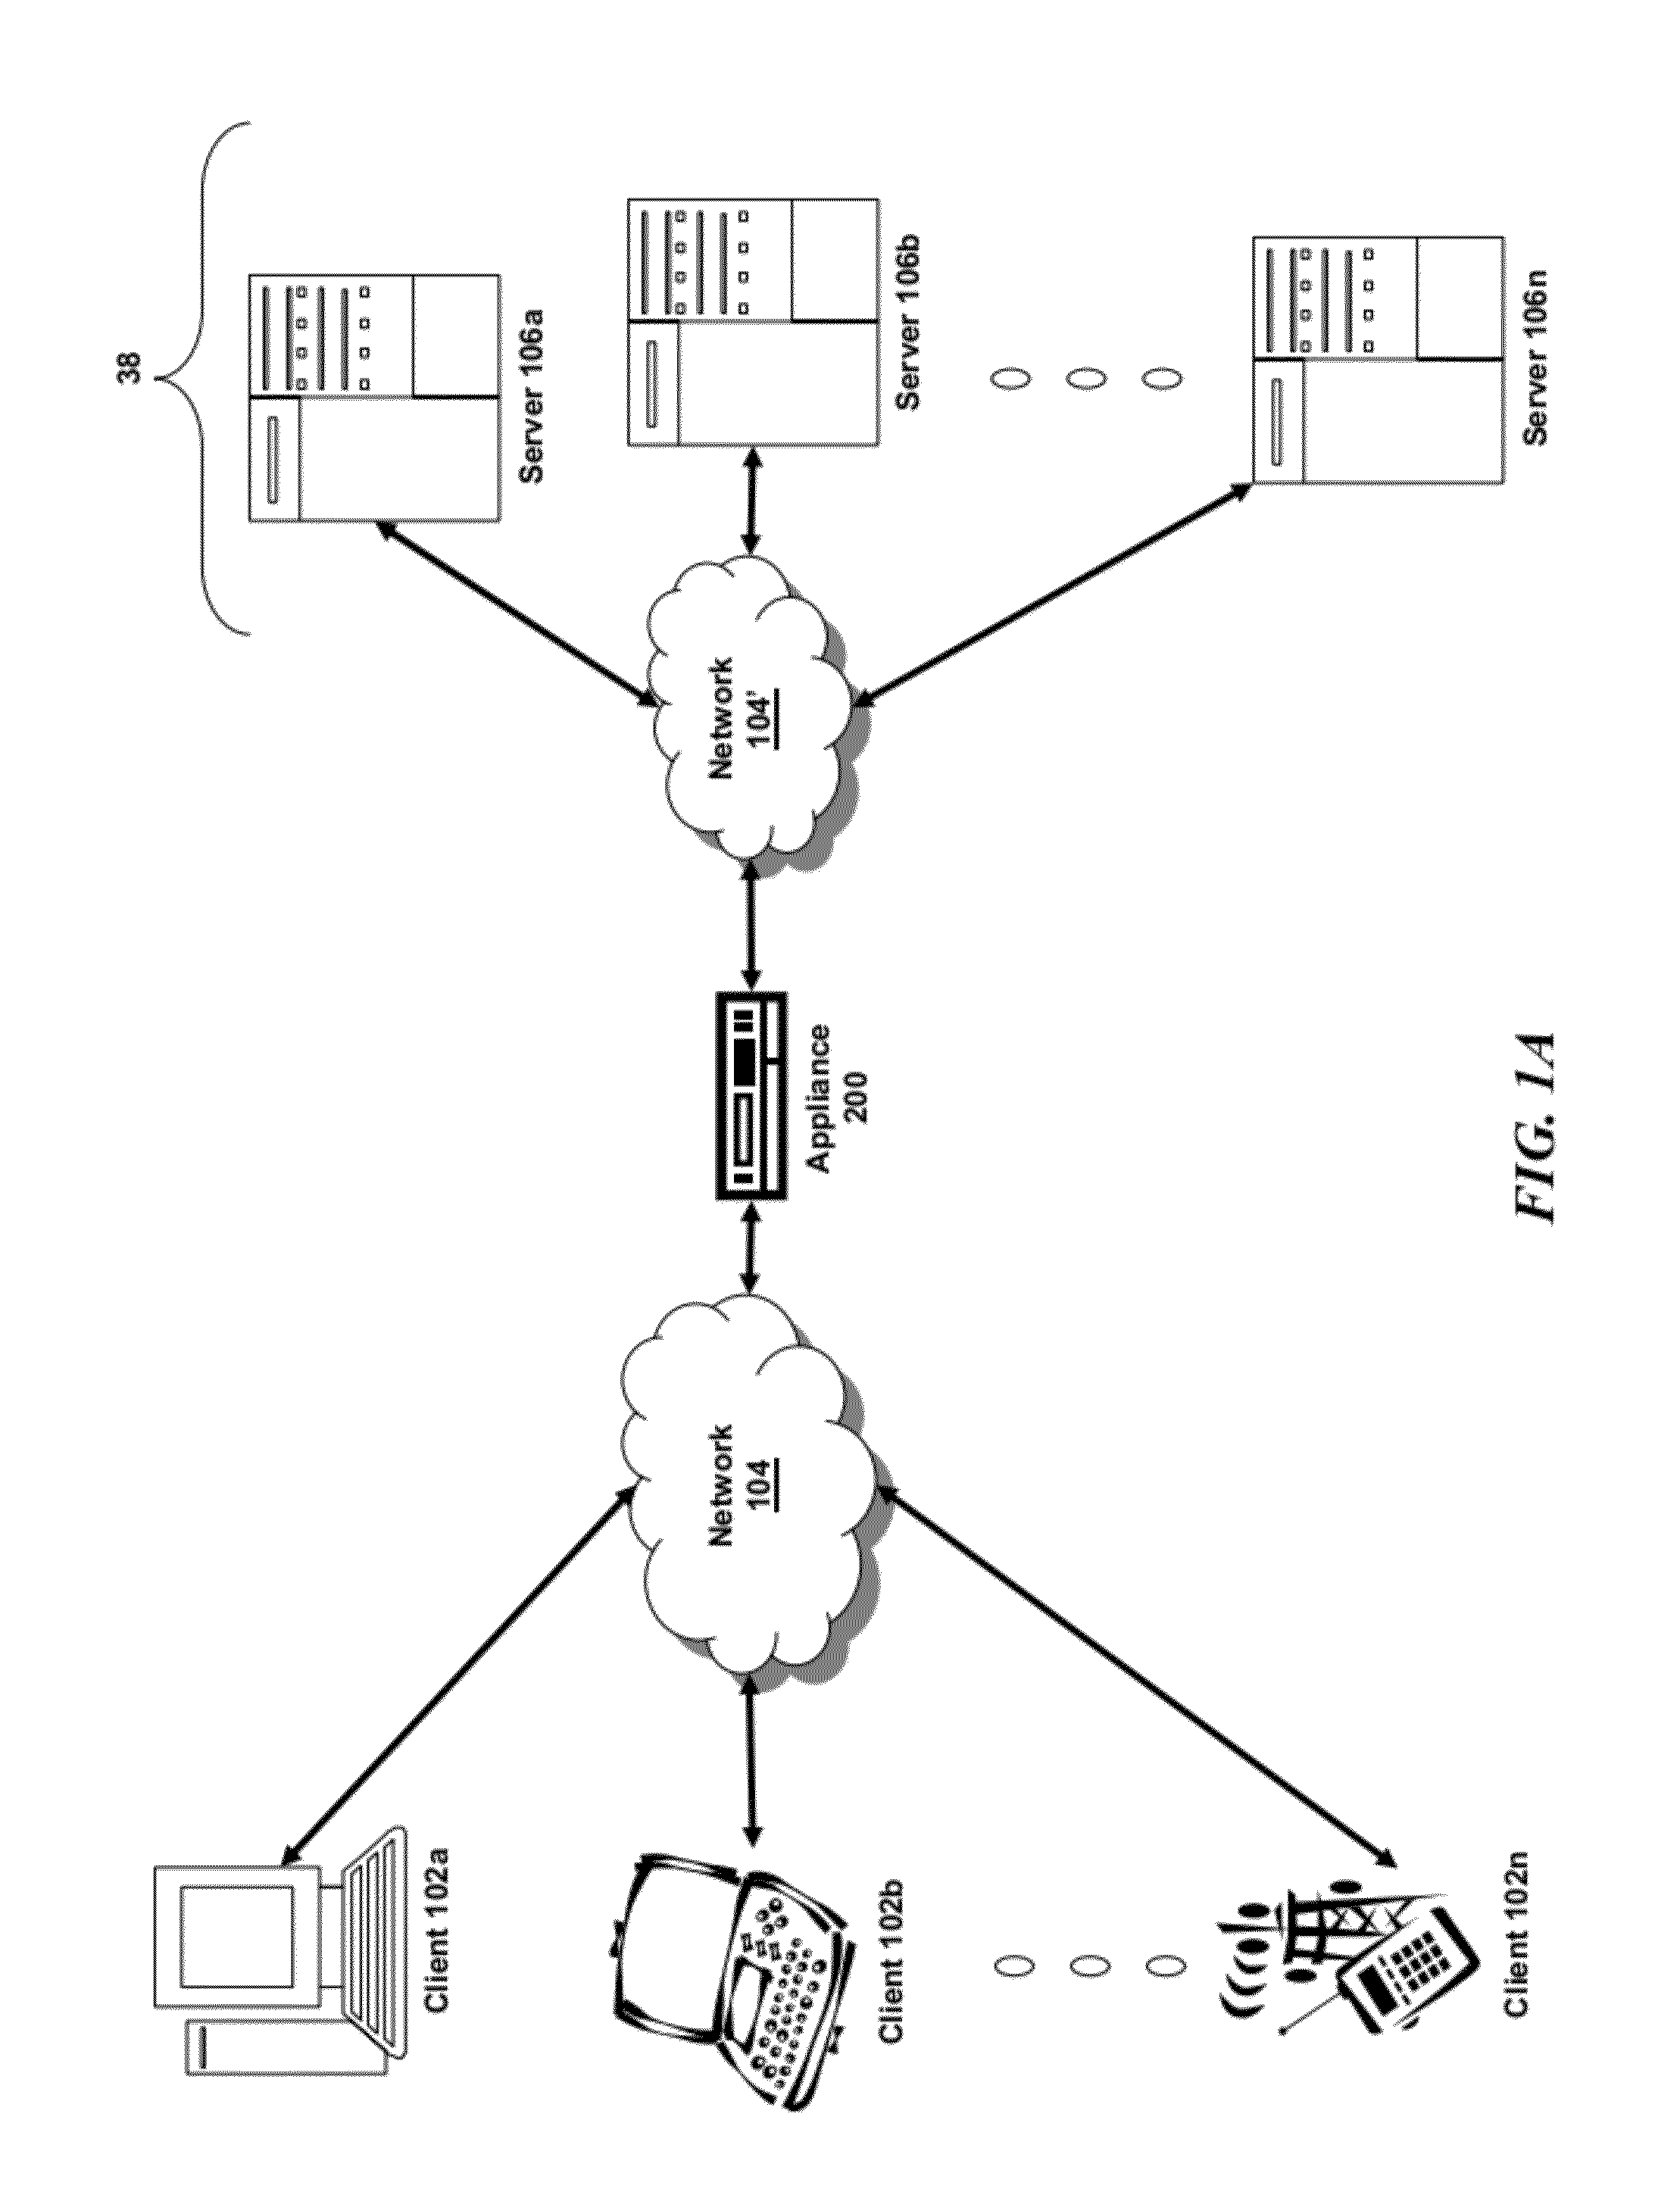 Systems and methods for cloud bridging between intranet resources and cloud resources